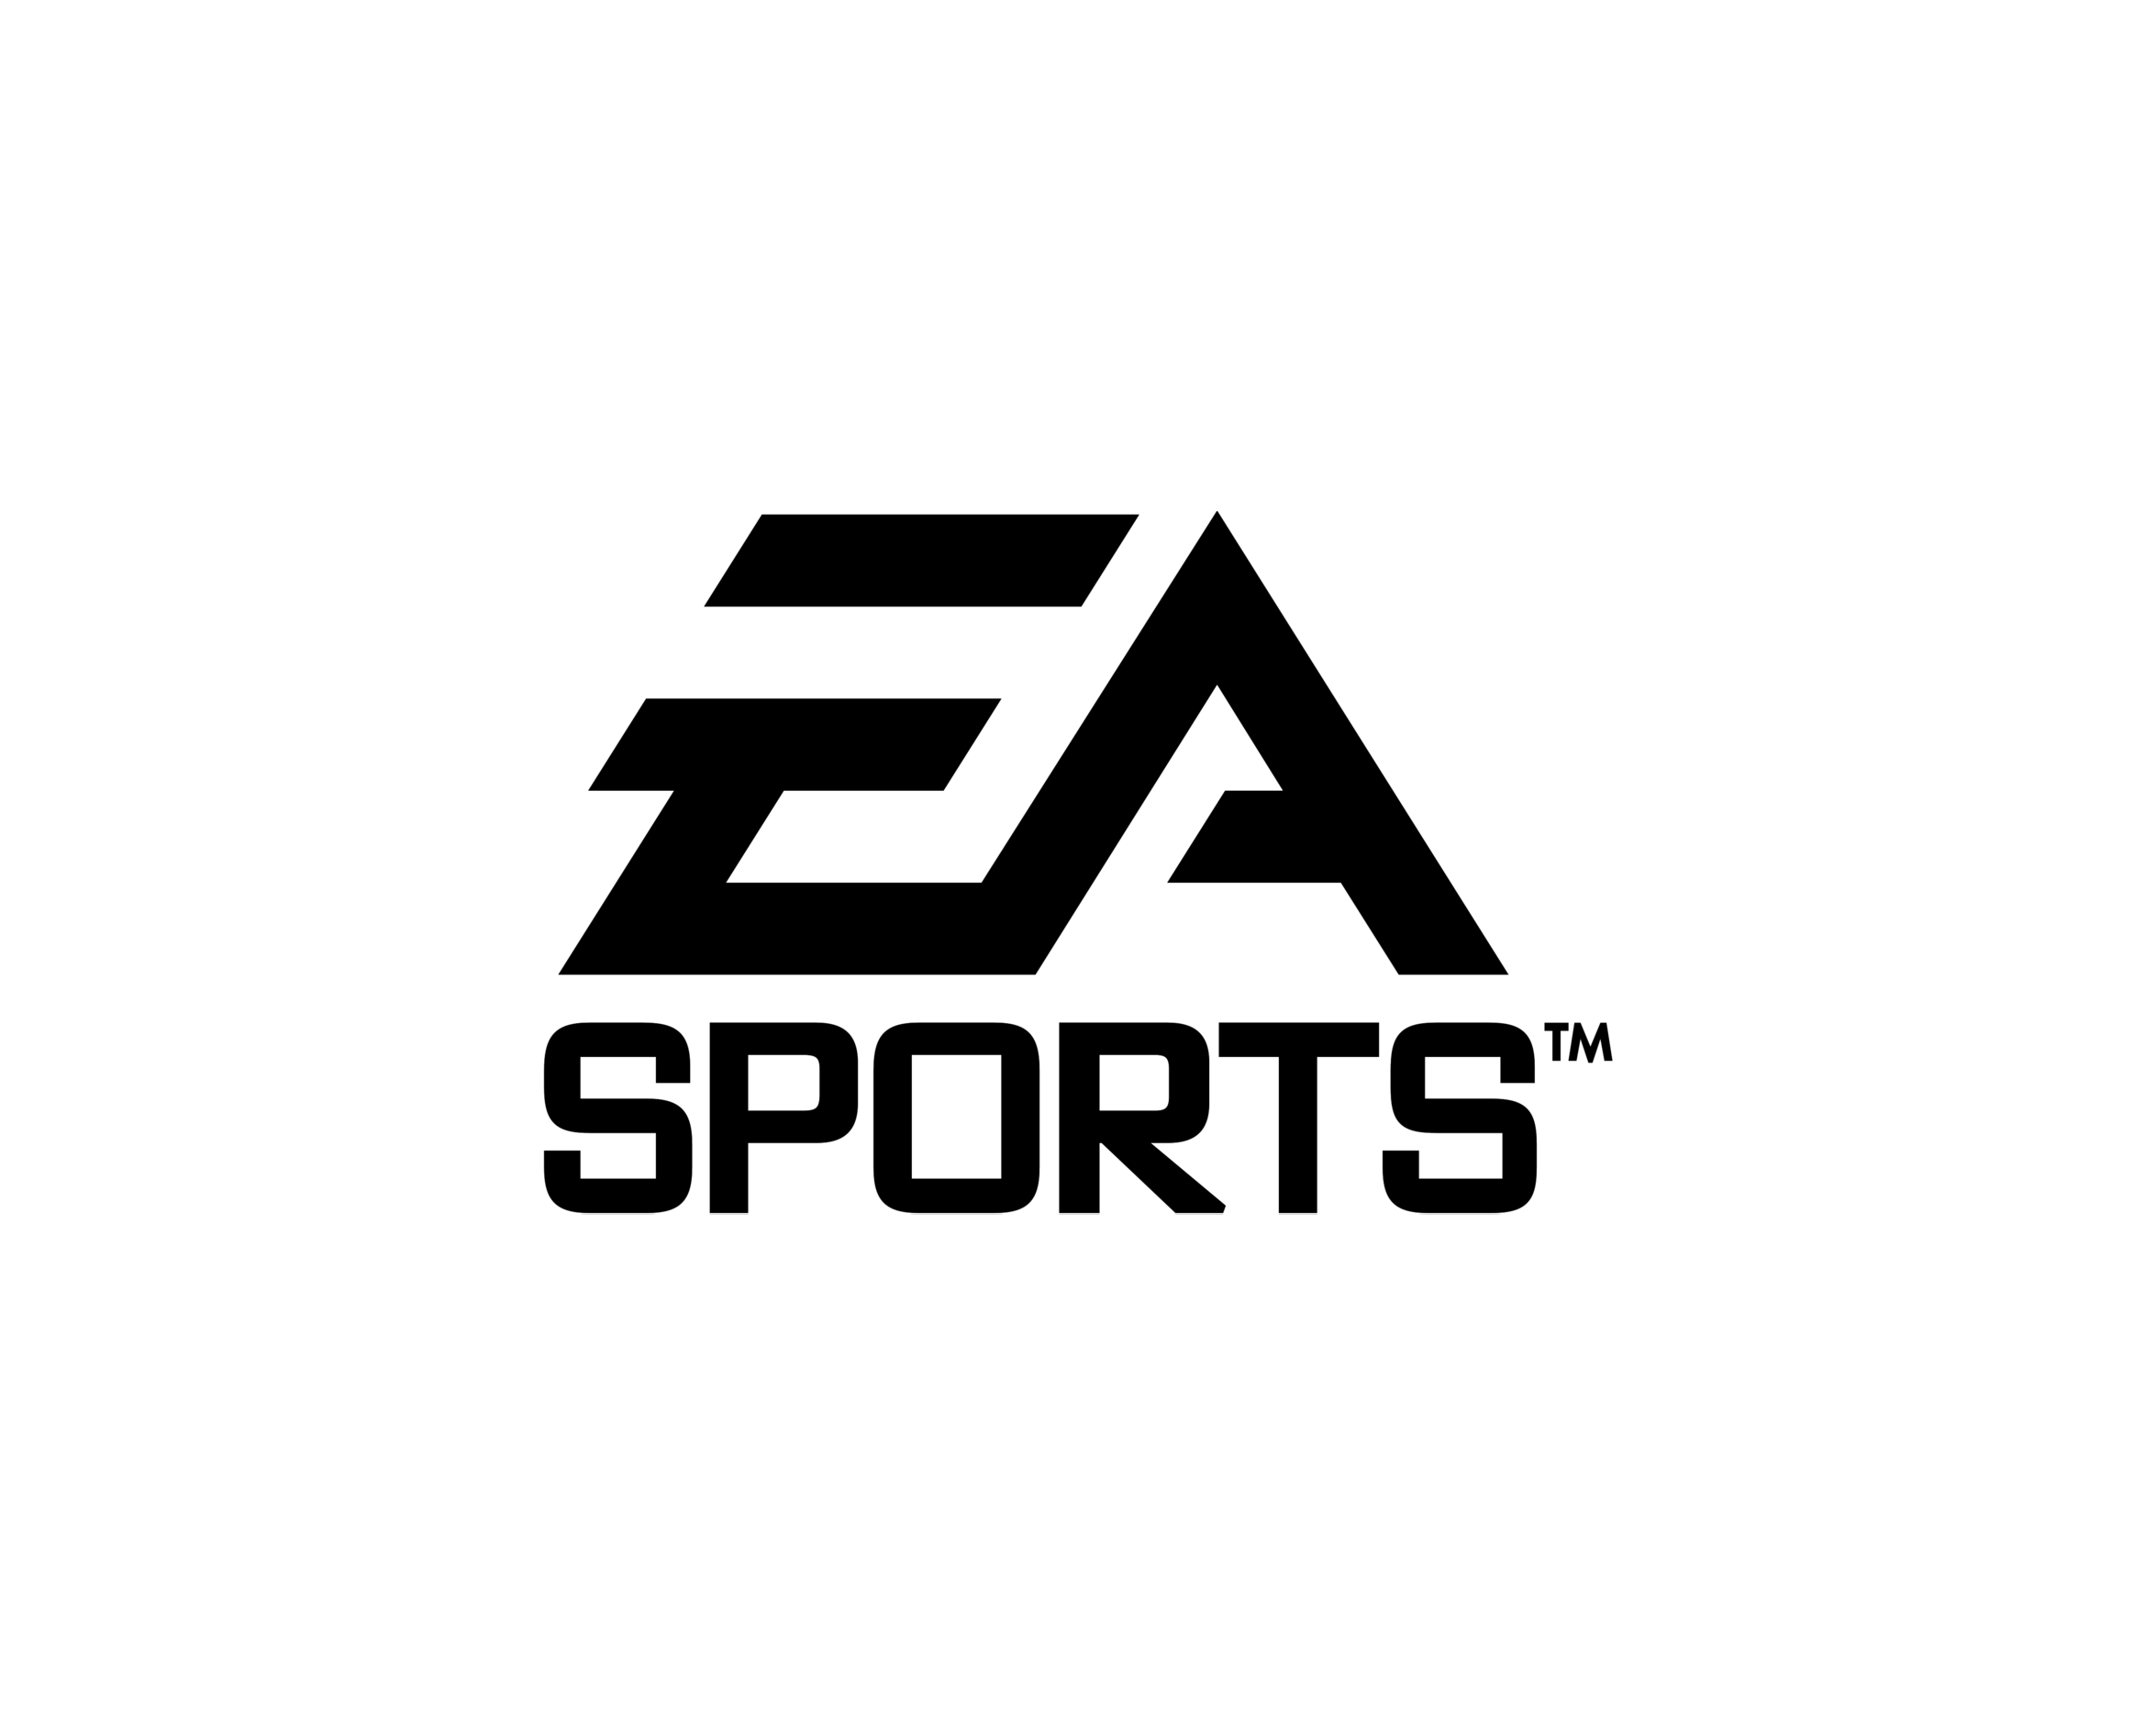 ea-sports-logo-black-and-white.png